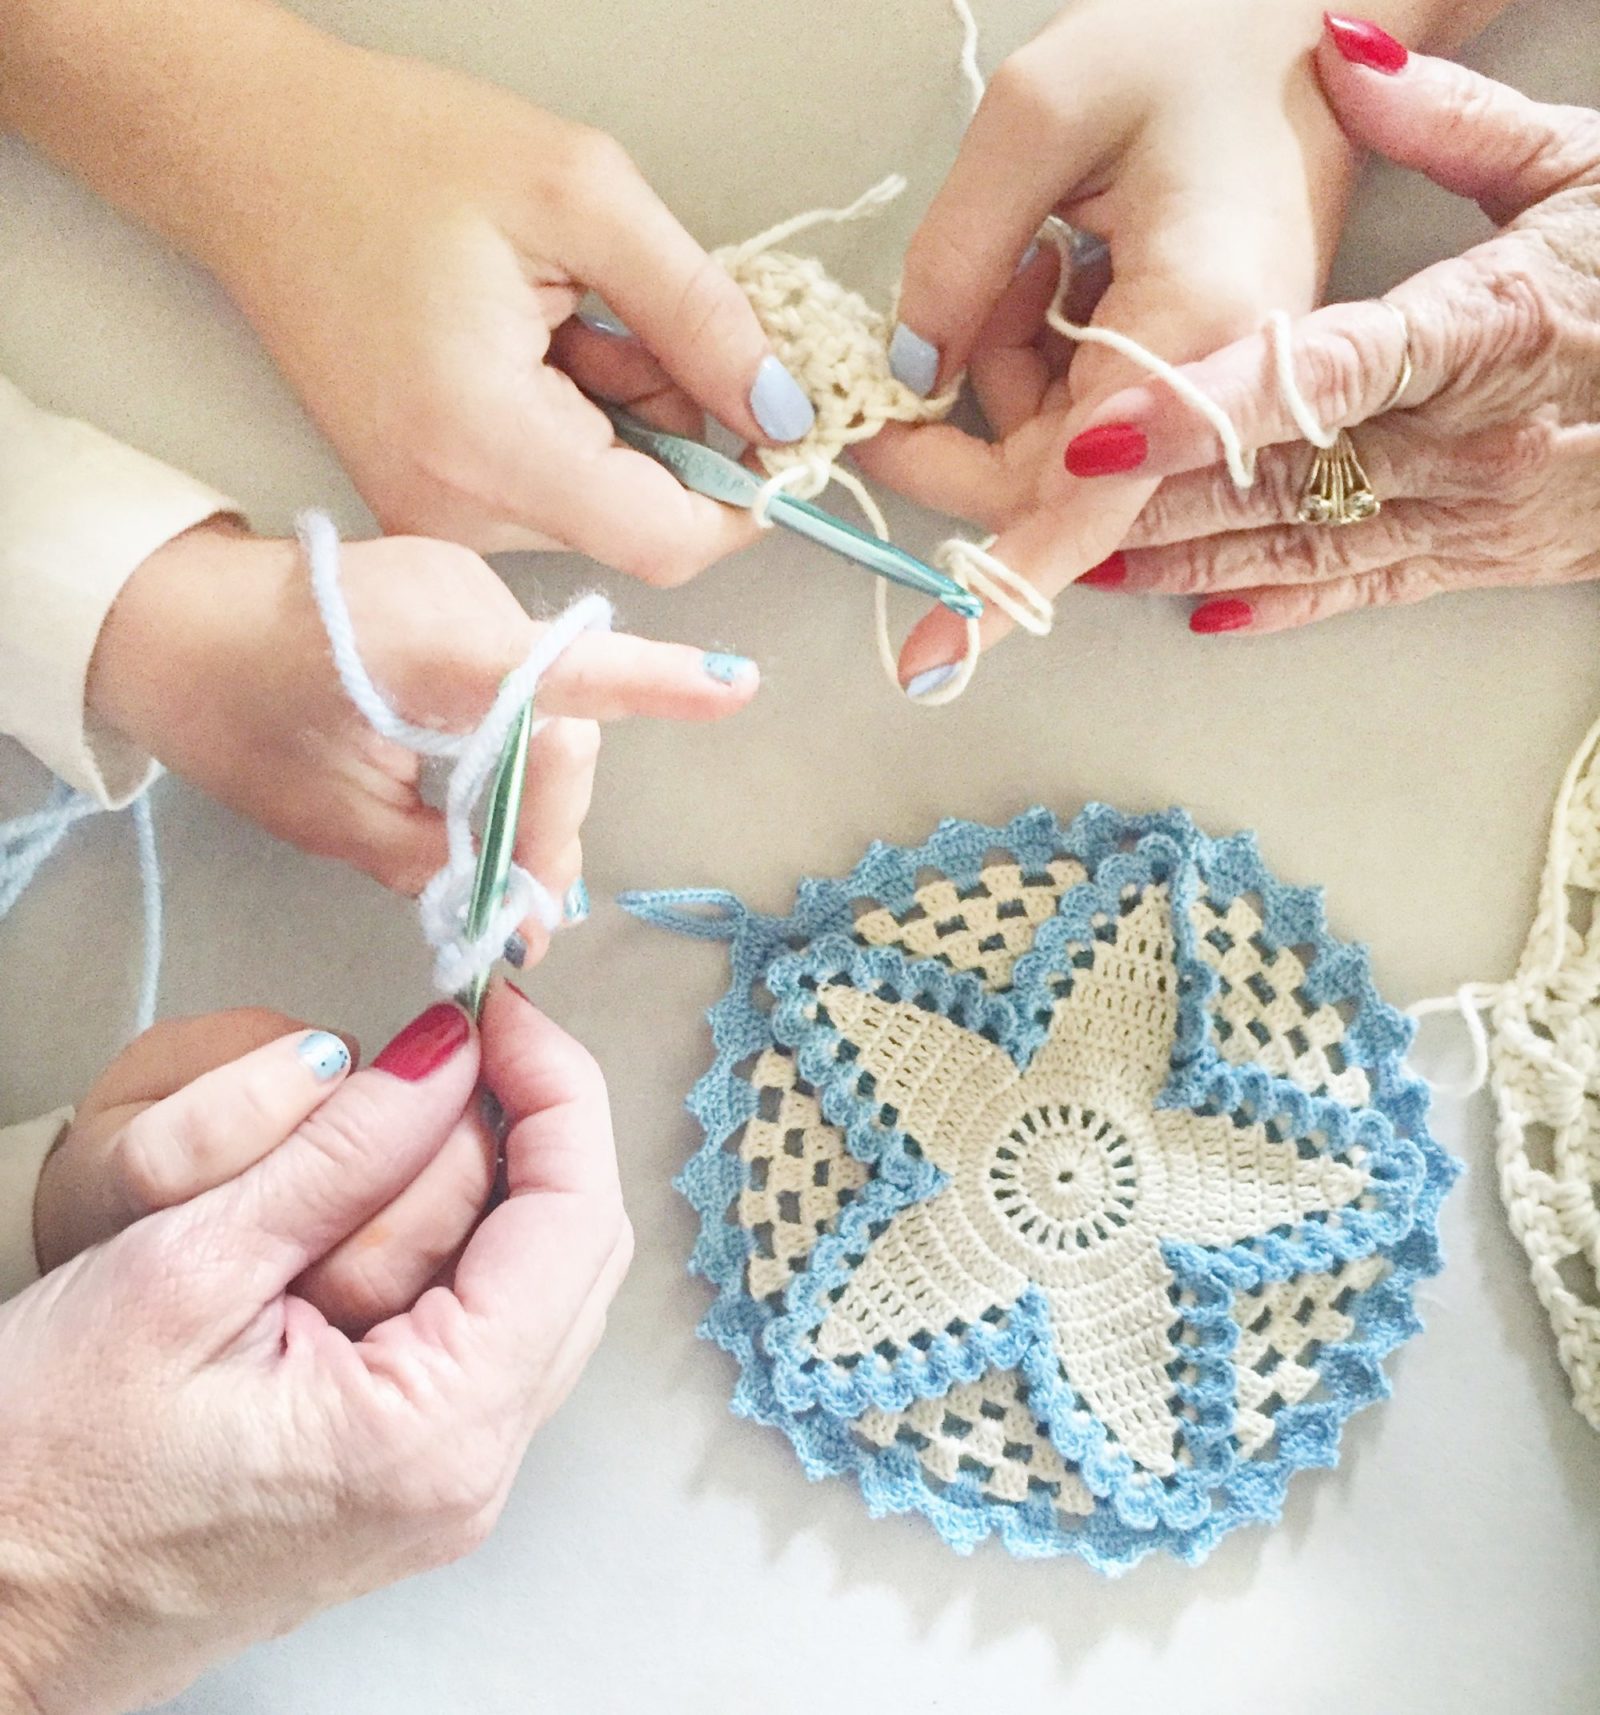 5 Life Lessons I've Learned From Crochet